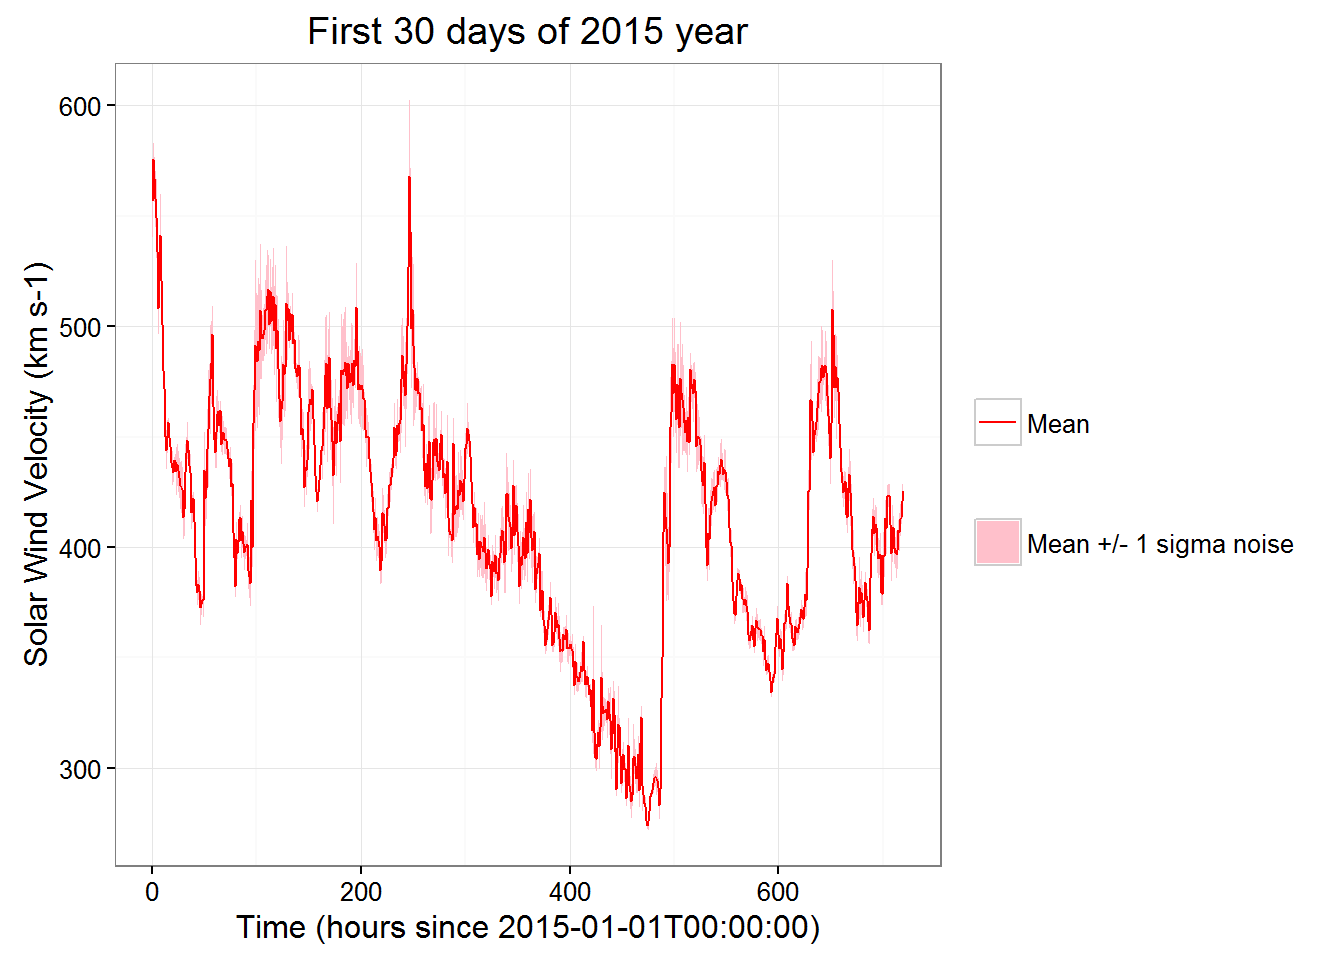 solar wind observations - velocity: first 30 days of 2015